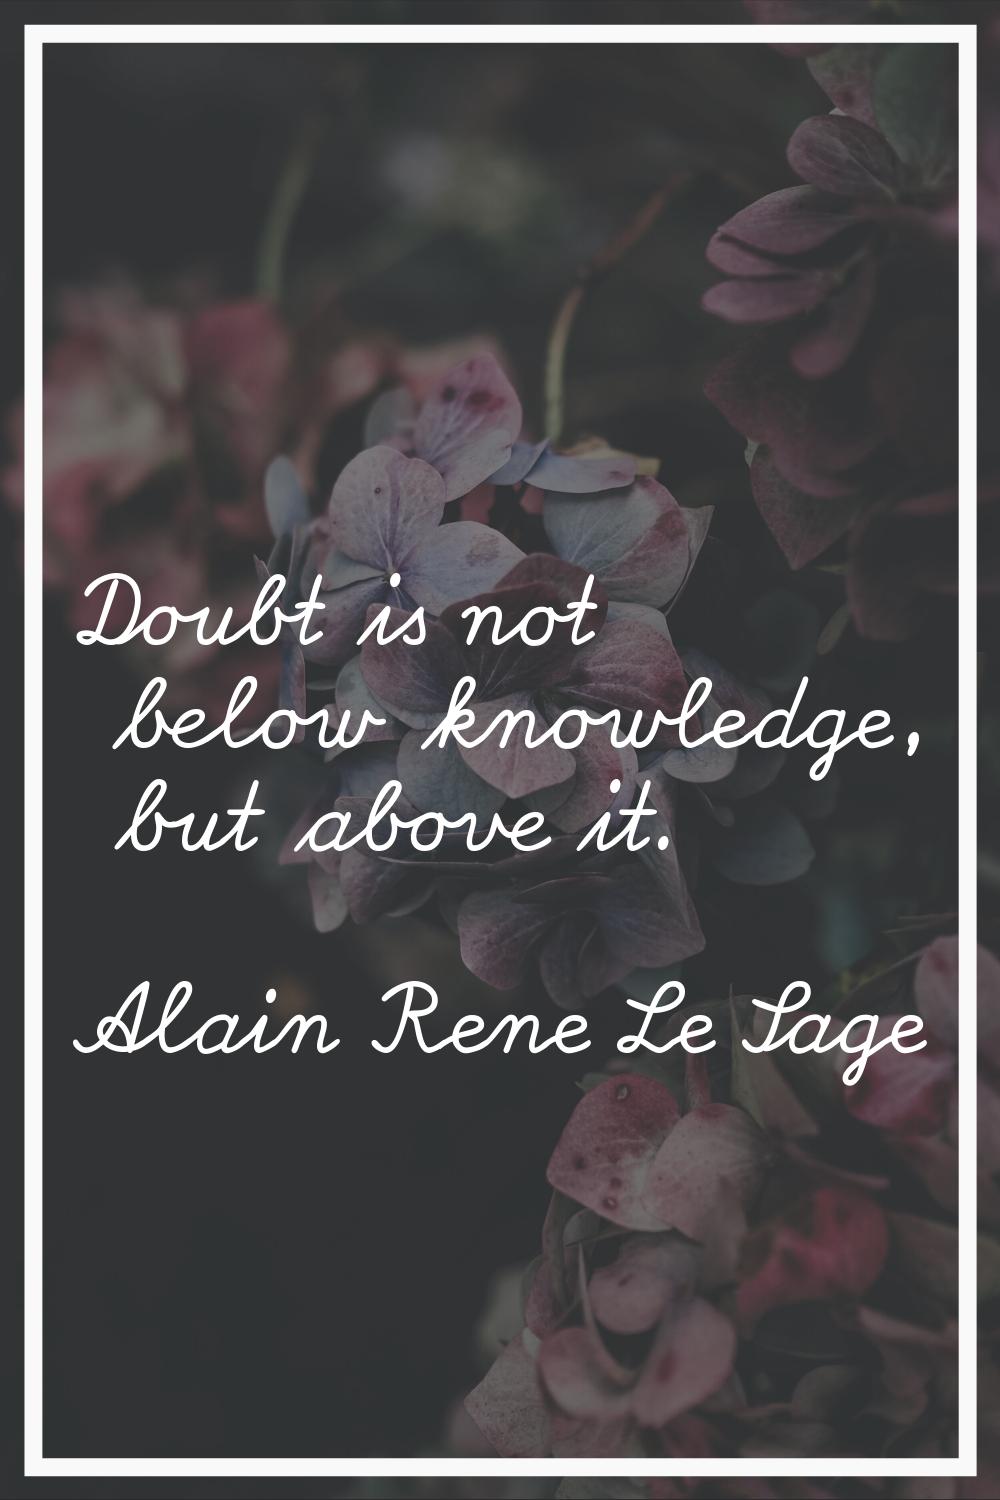 Doubt is not below knowledge, but above it.